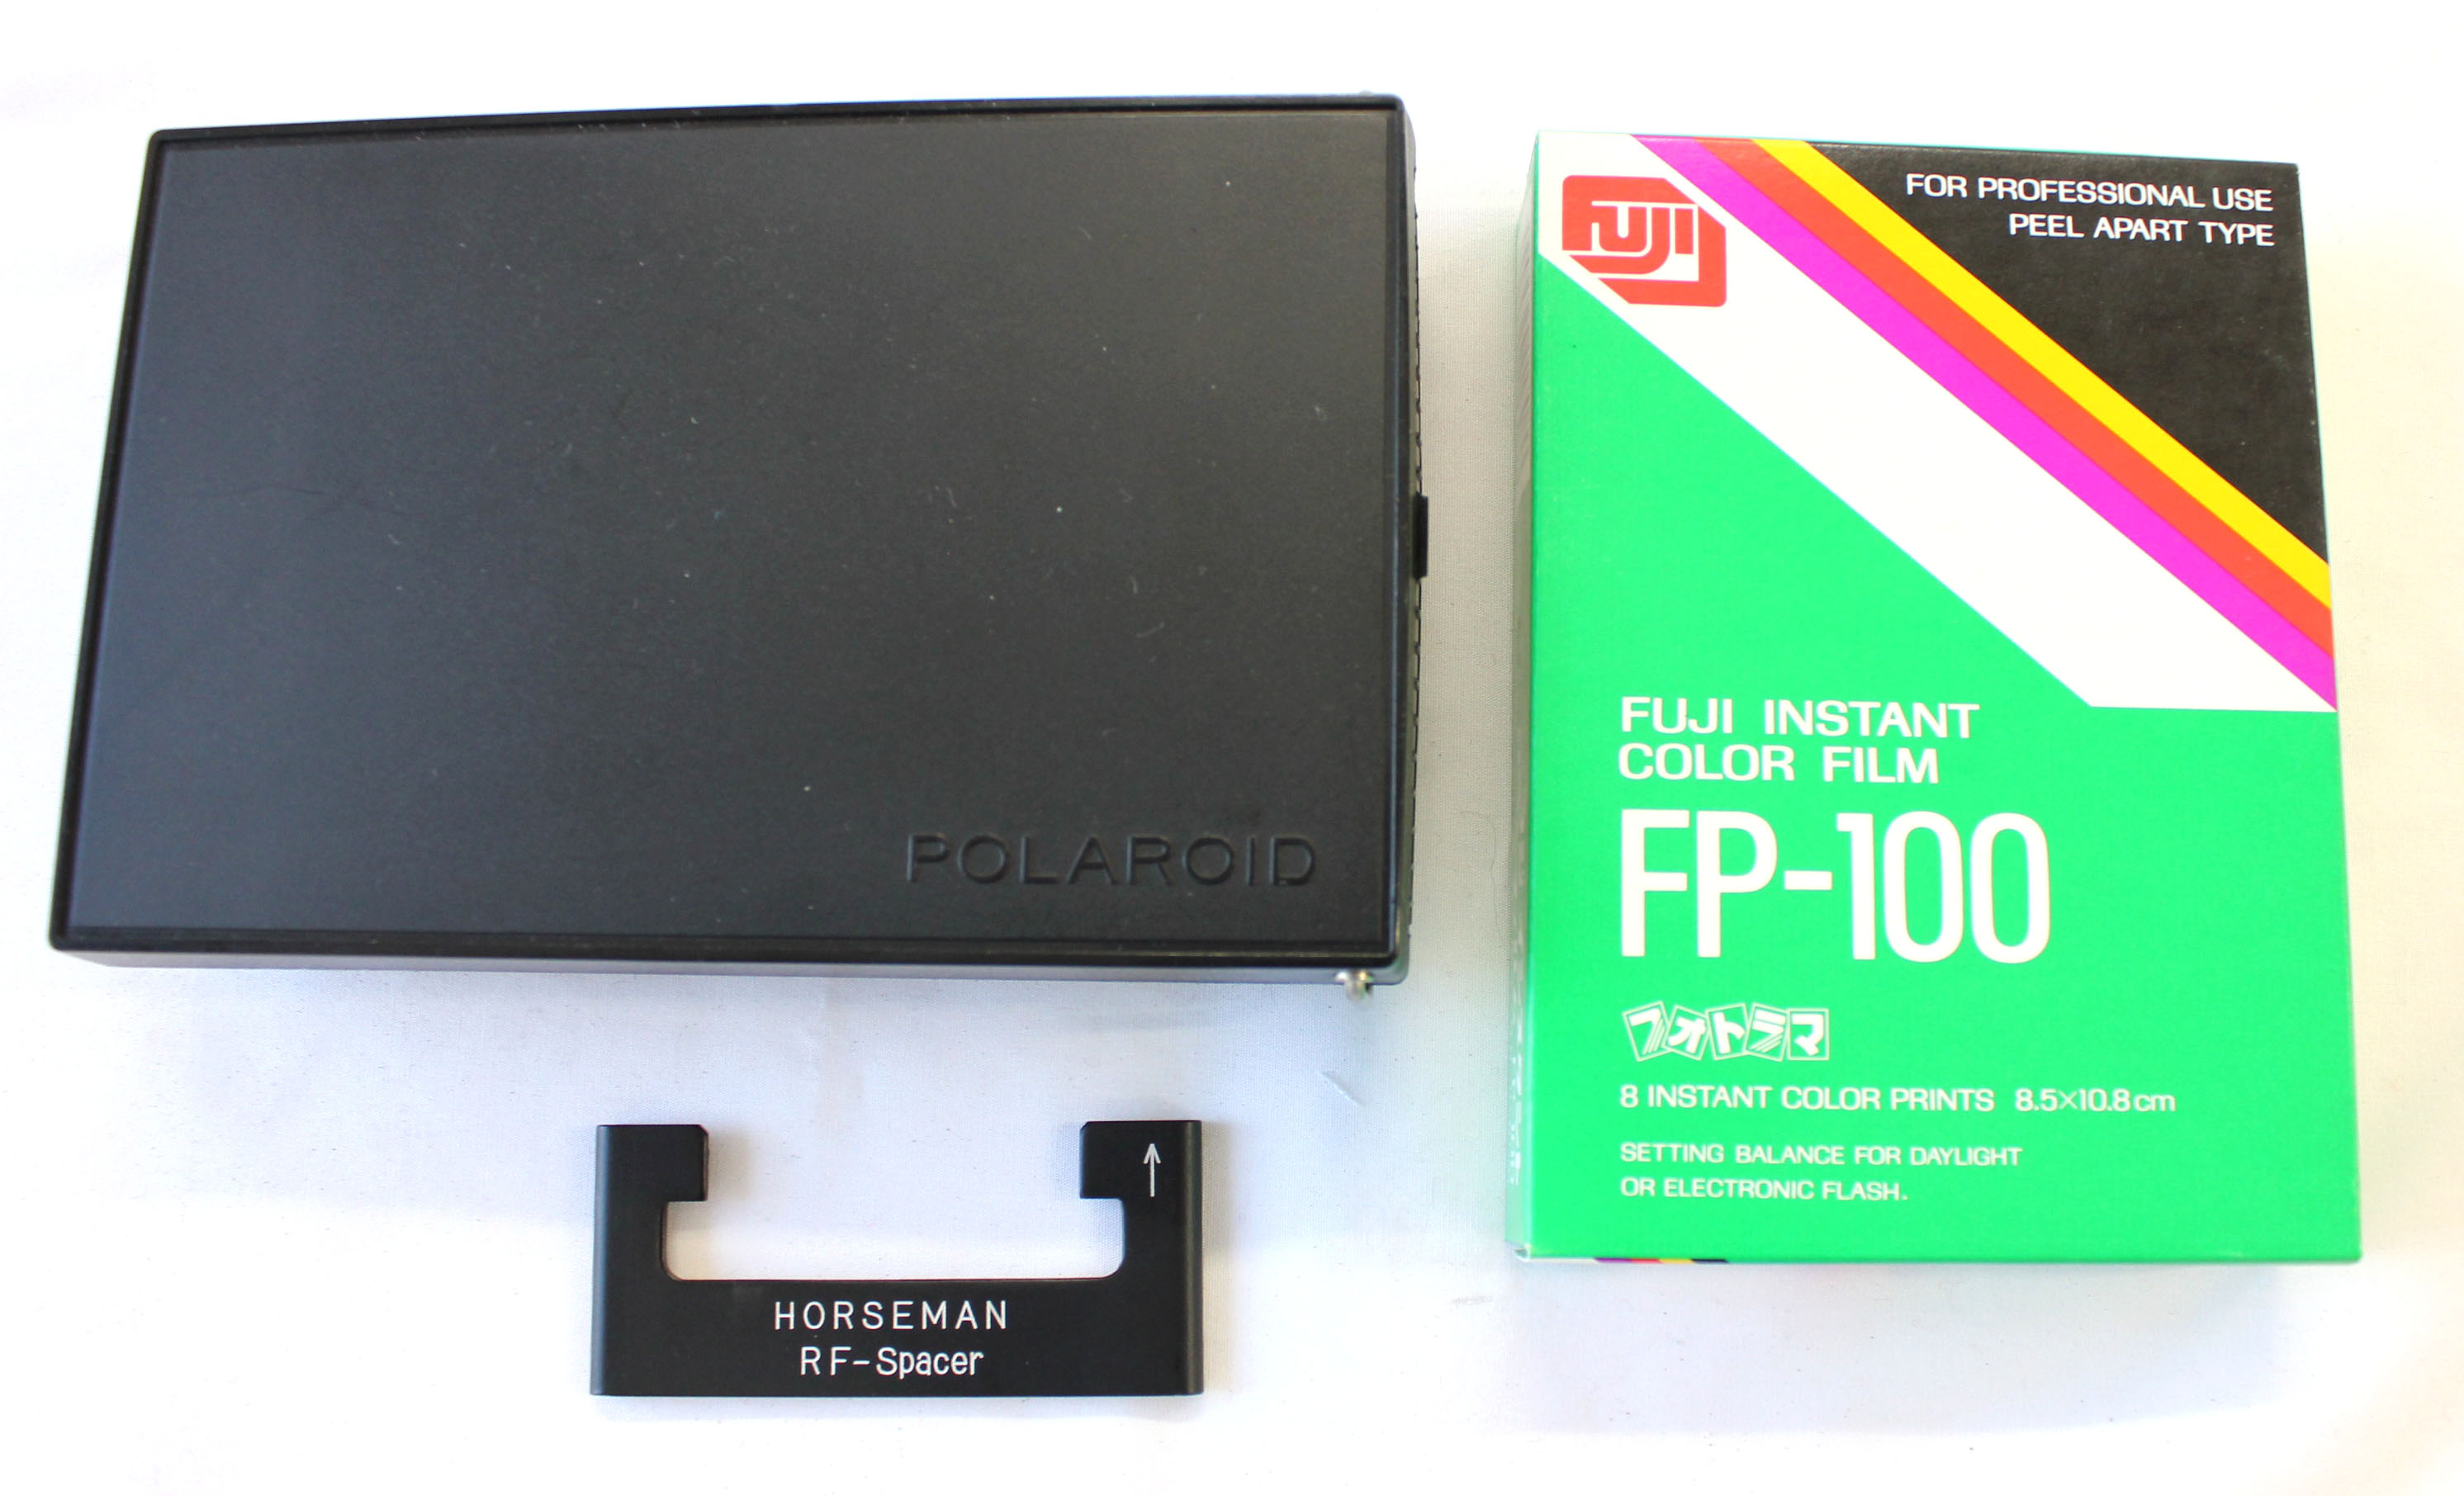 Horseman Polaroid Film Back Holder 6x9 for VH, VH-R, 980, 985 with Spacer and FP-100 film from Japan Photo 0